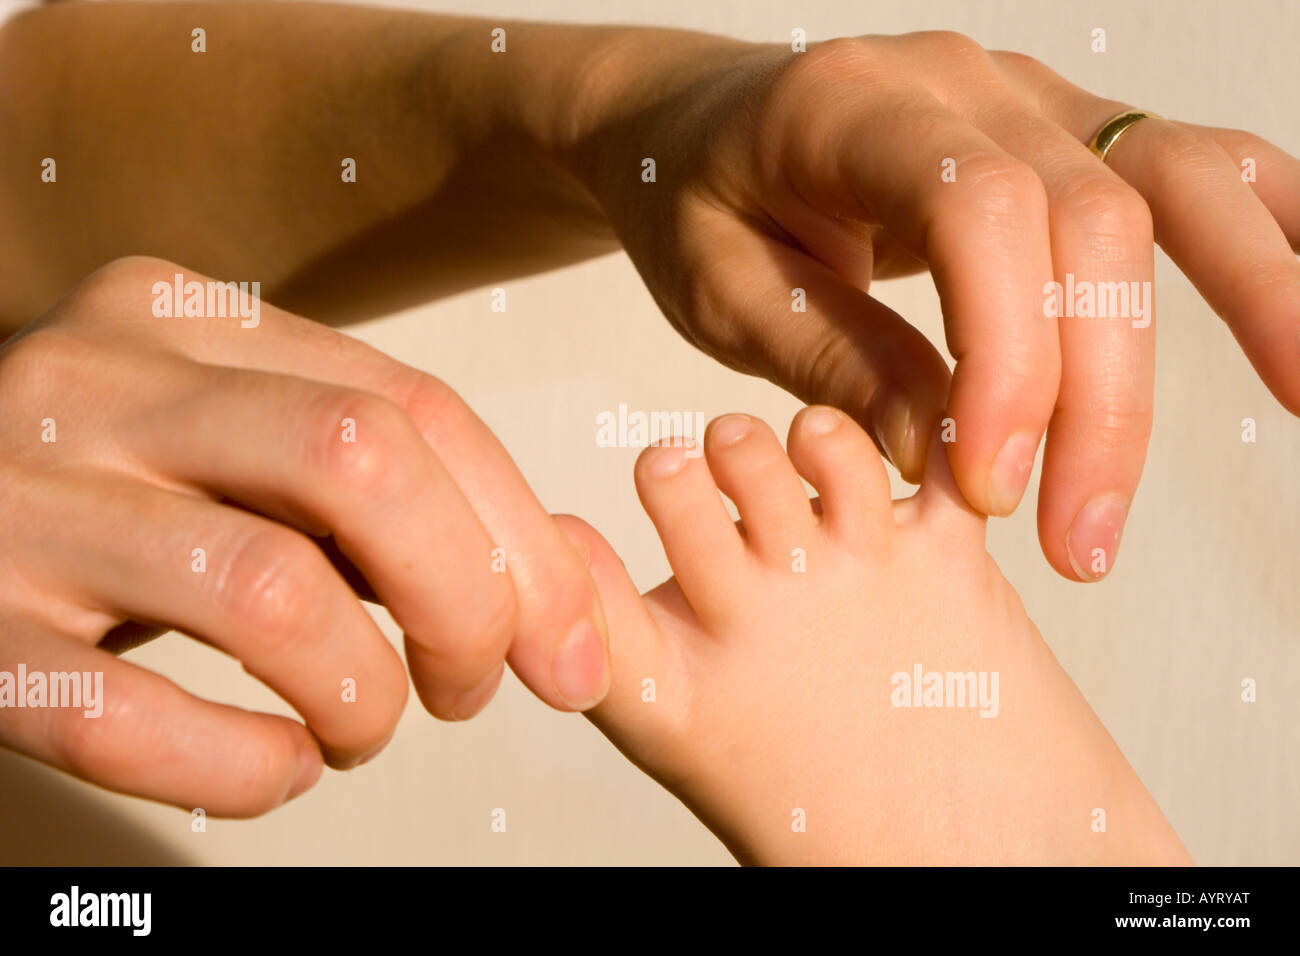 Woman's hands tugging at child's toes Stock Photo